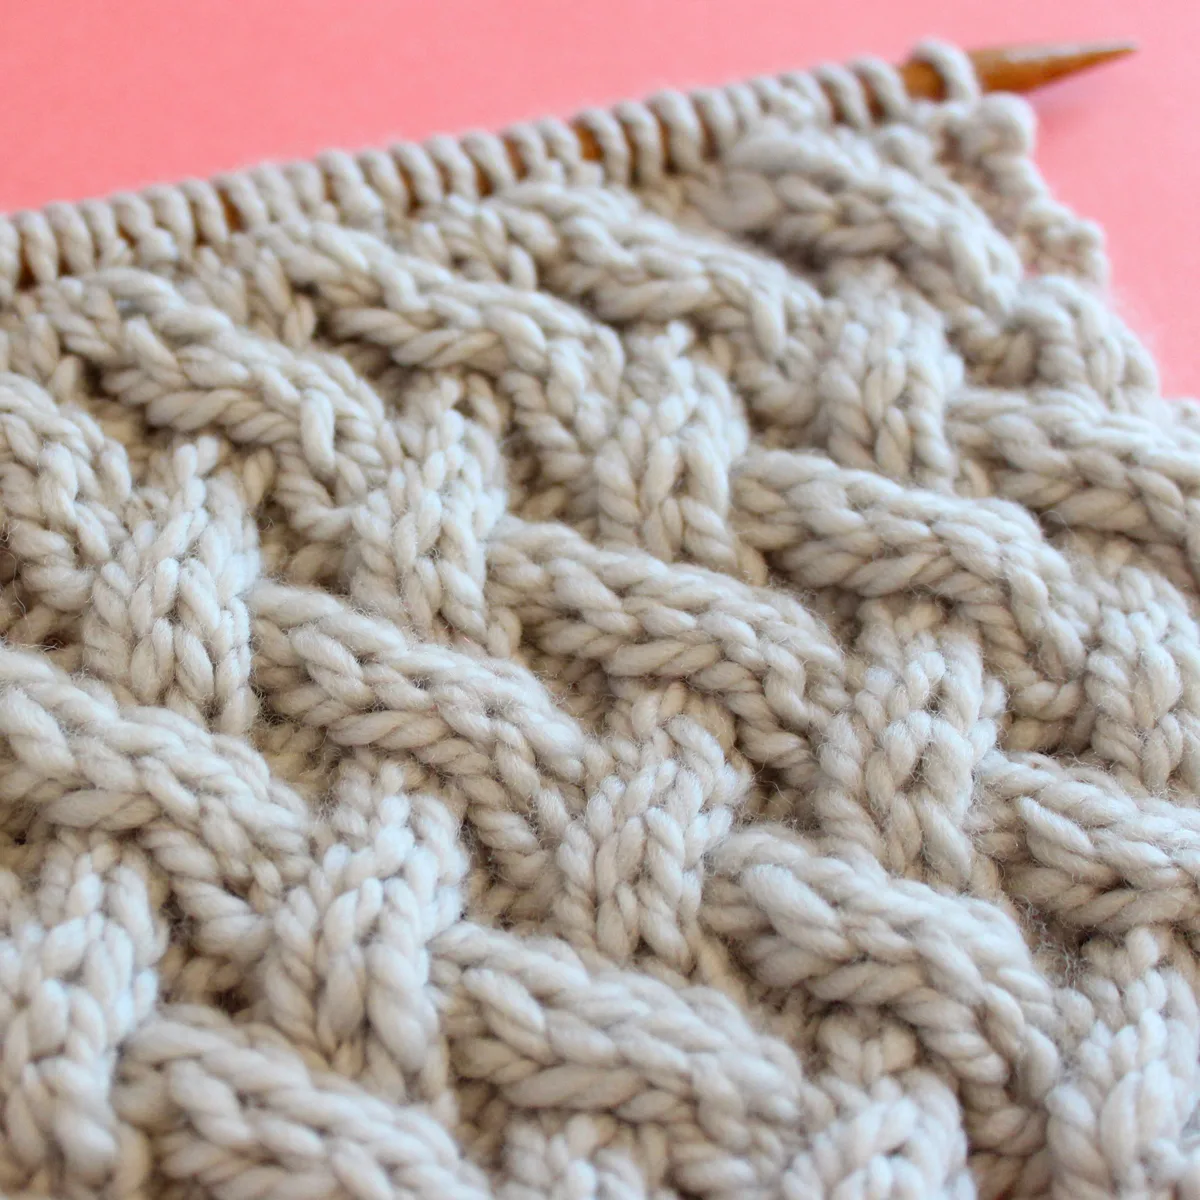 Close-Up texture of the Lattice Cable stitch pattern on knitting needle.